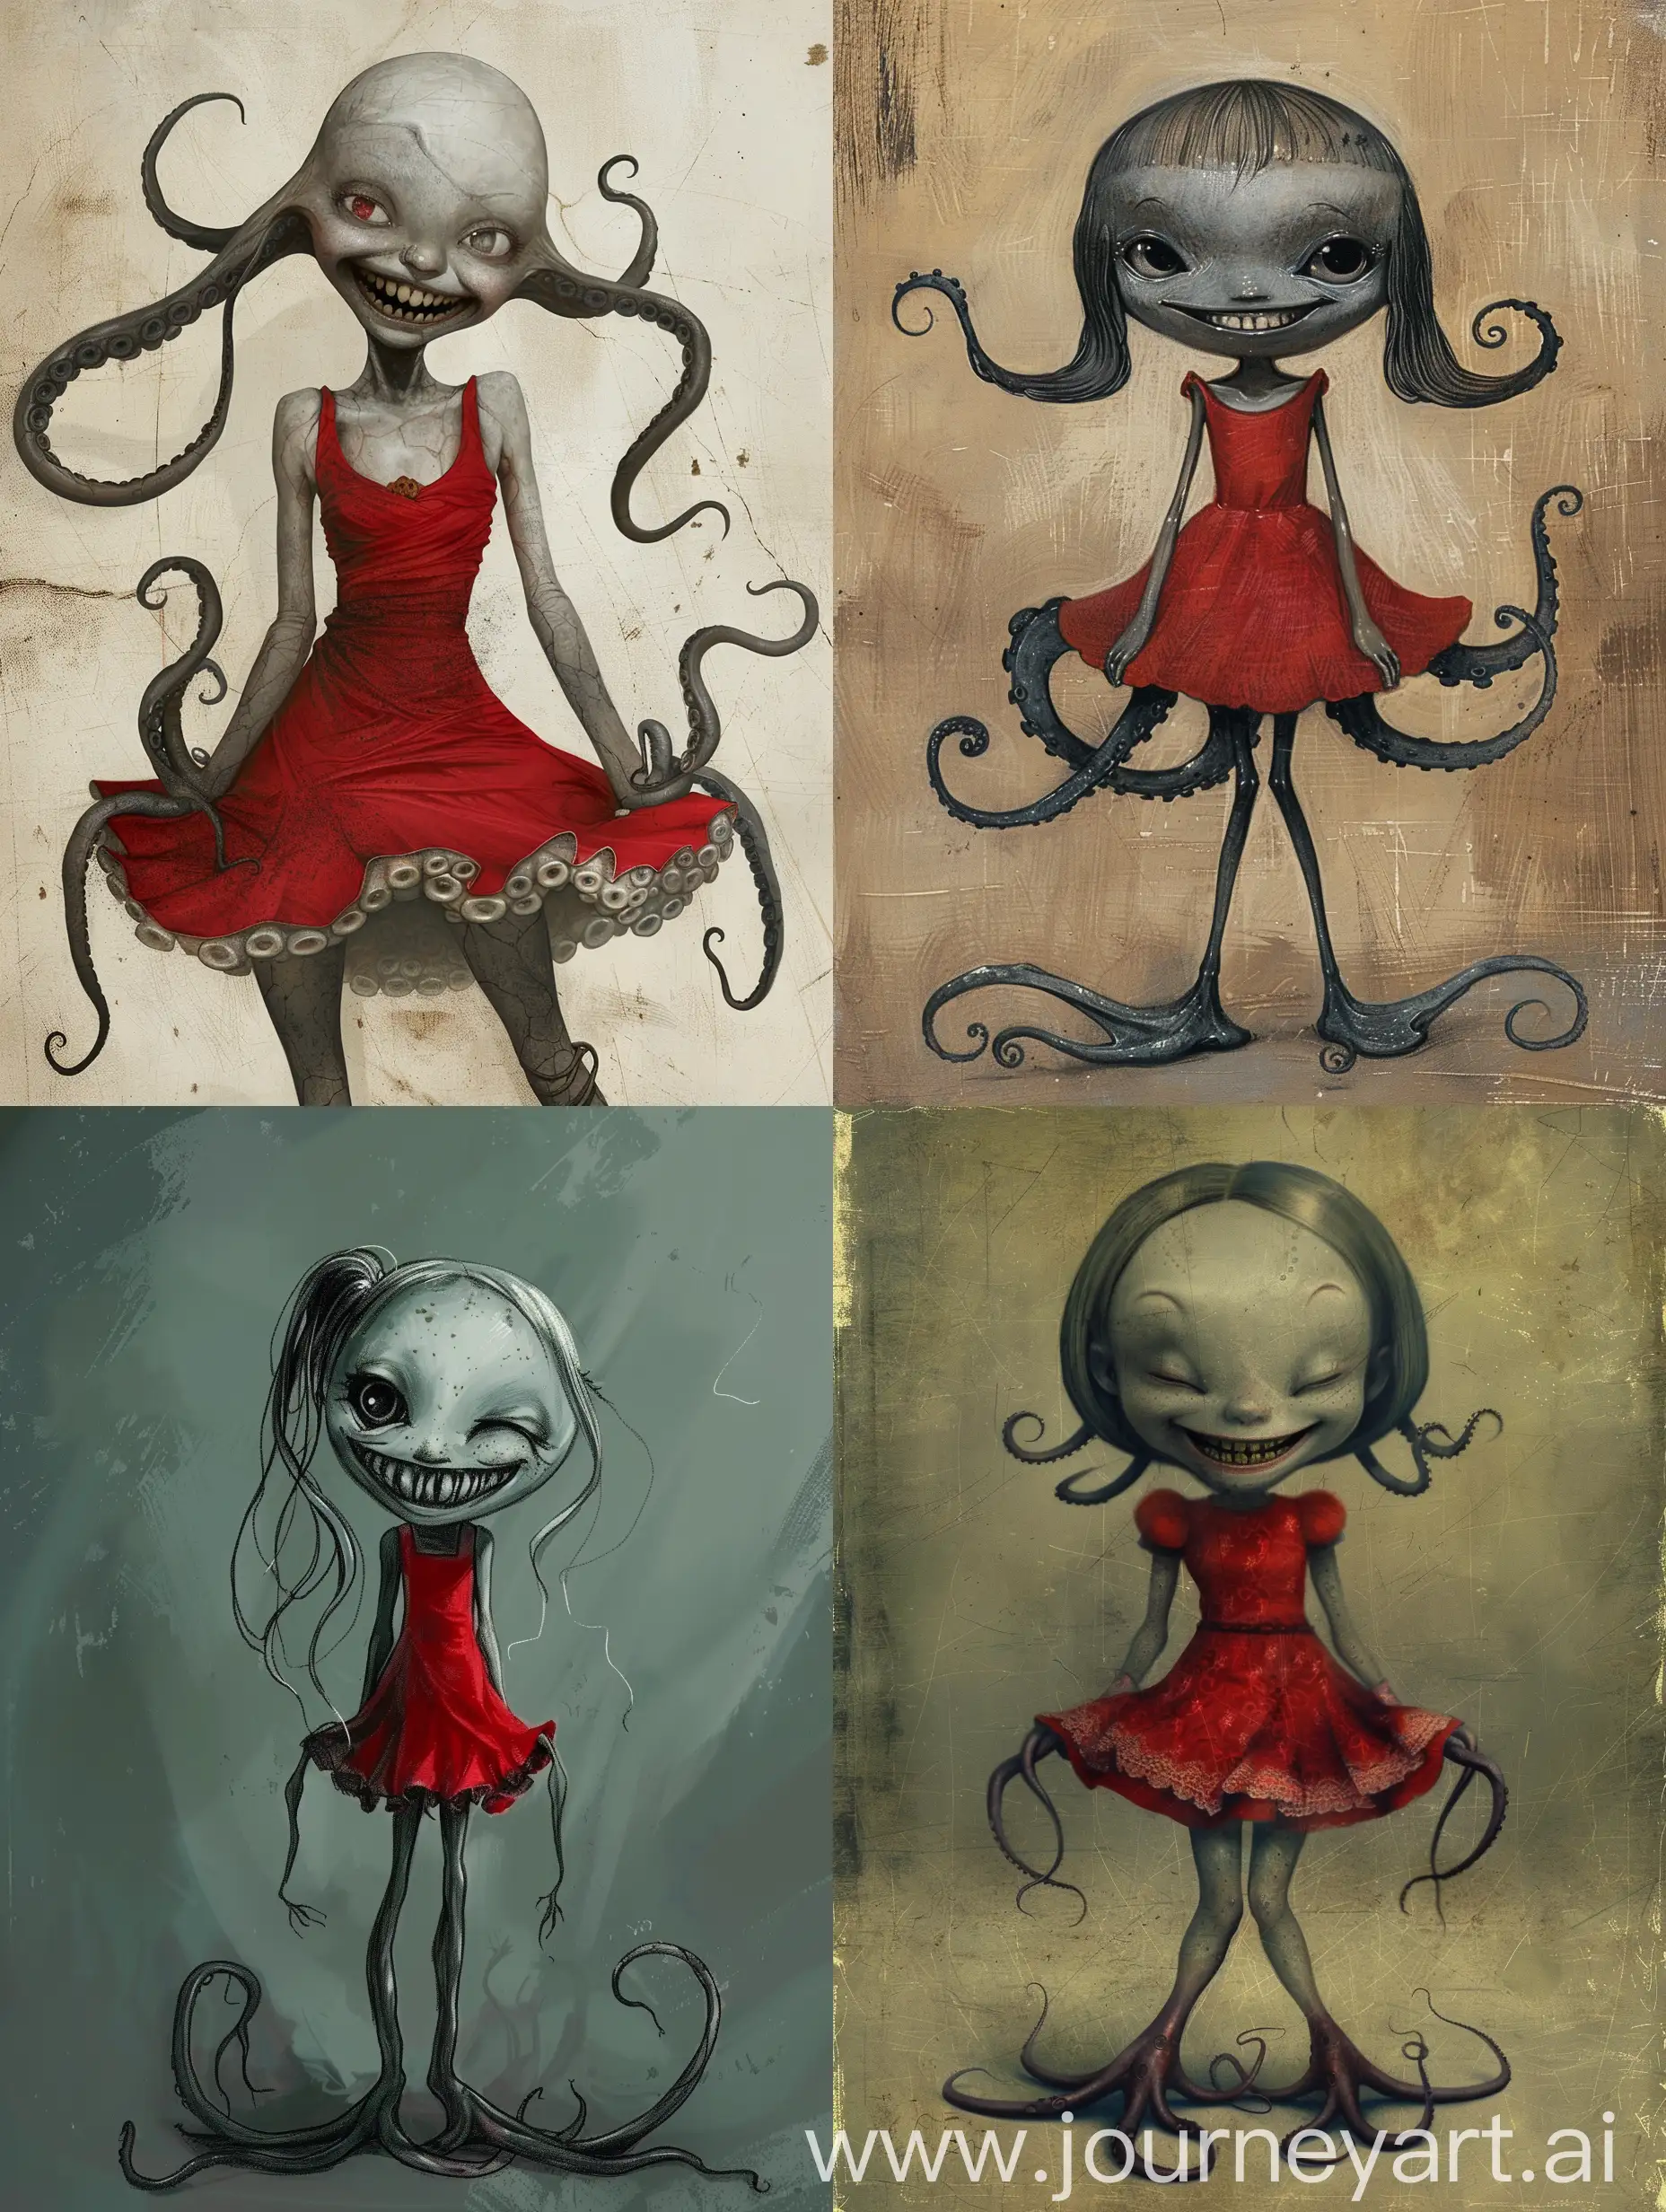 girl, tentacles instead of legs, red dress, gray skin, grin